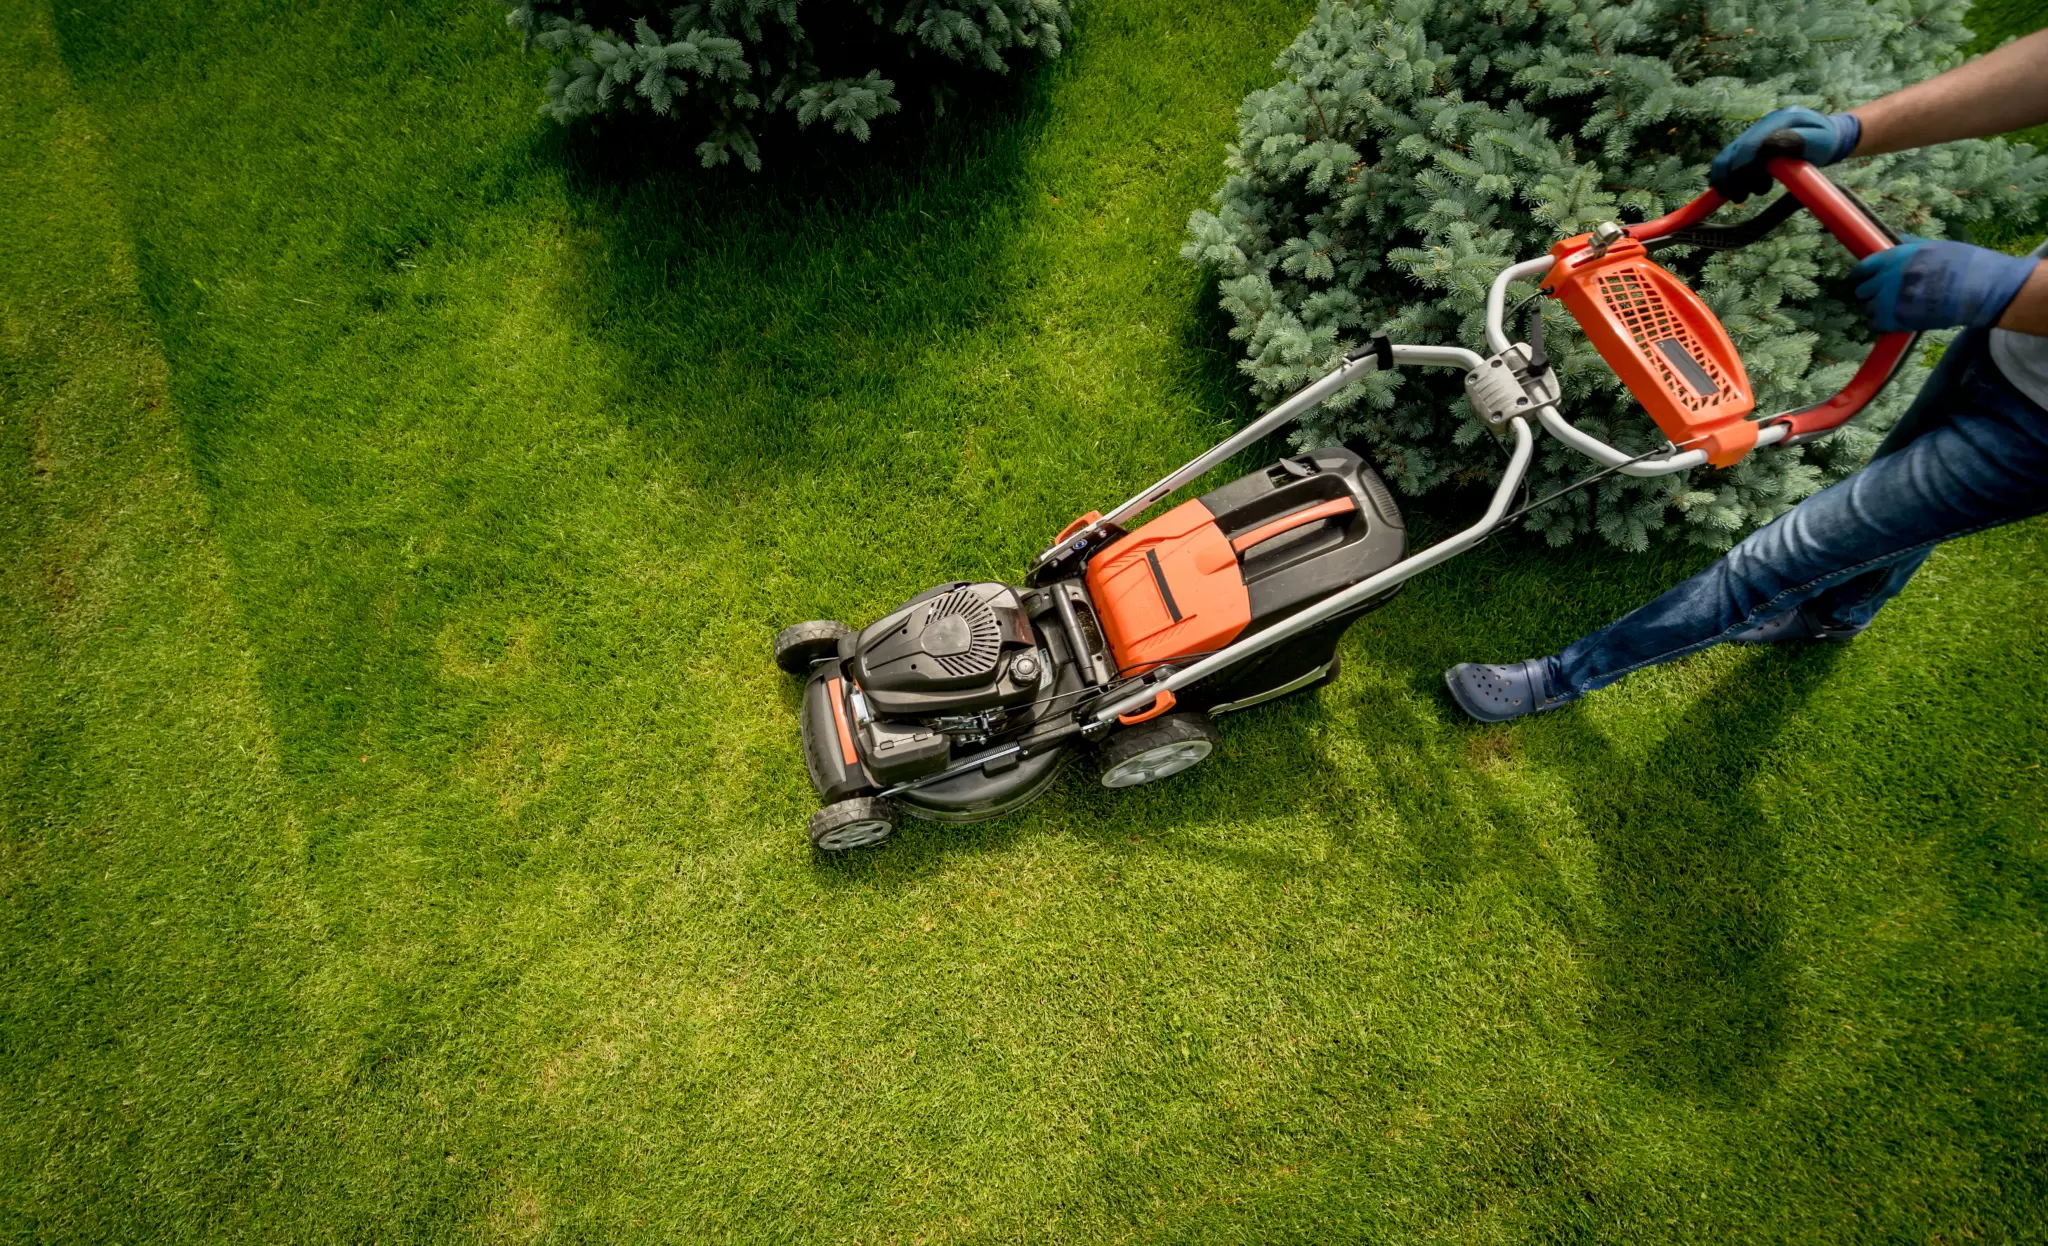 Hiring professional lawn services